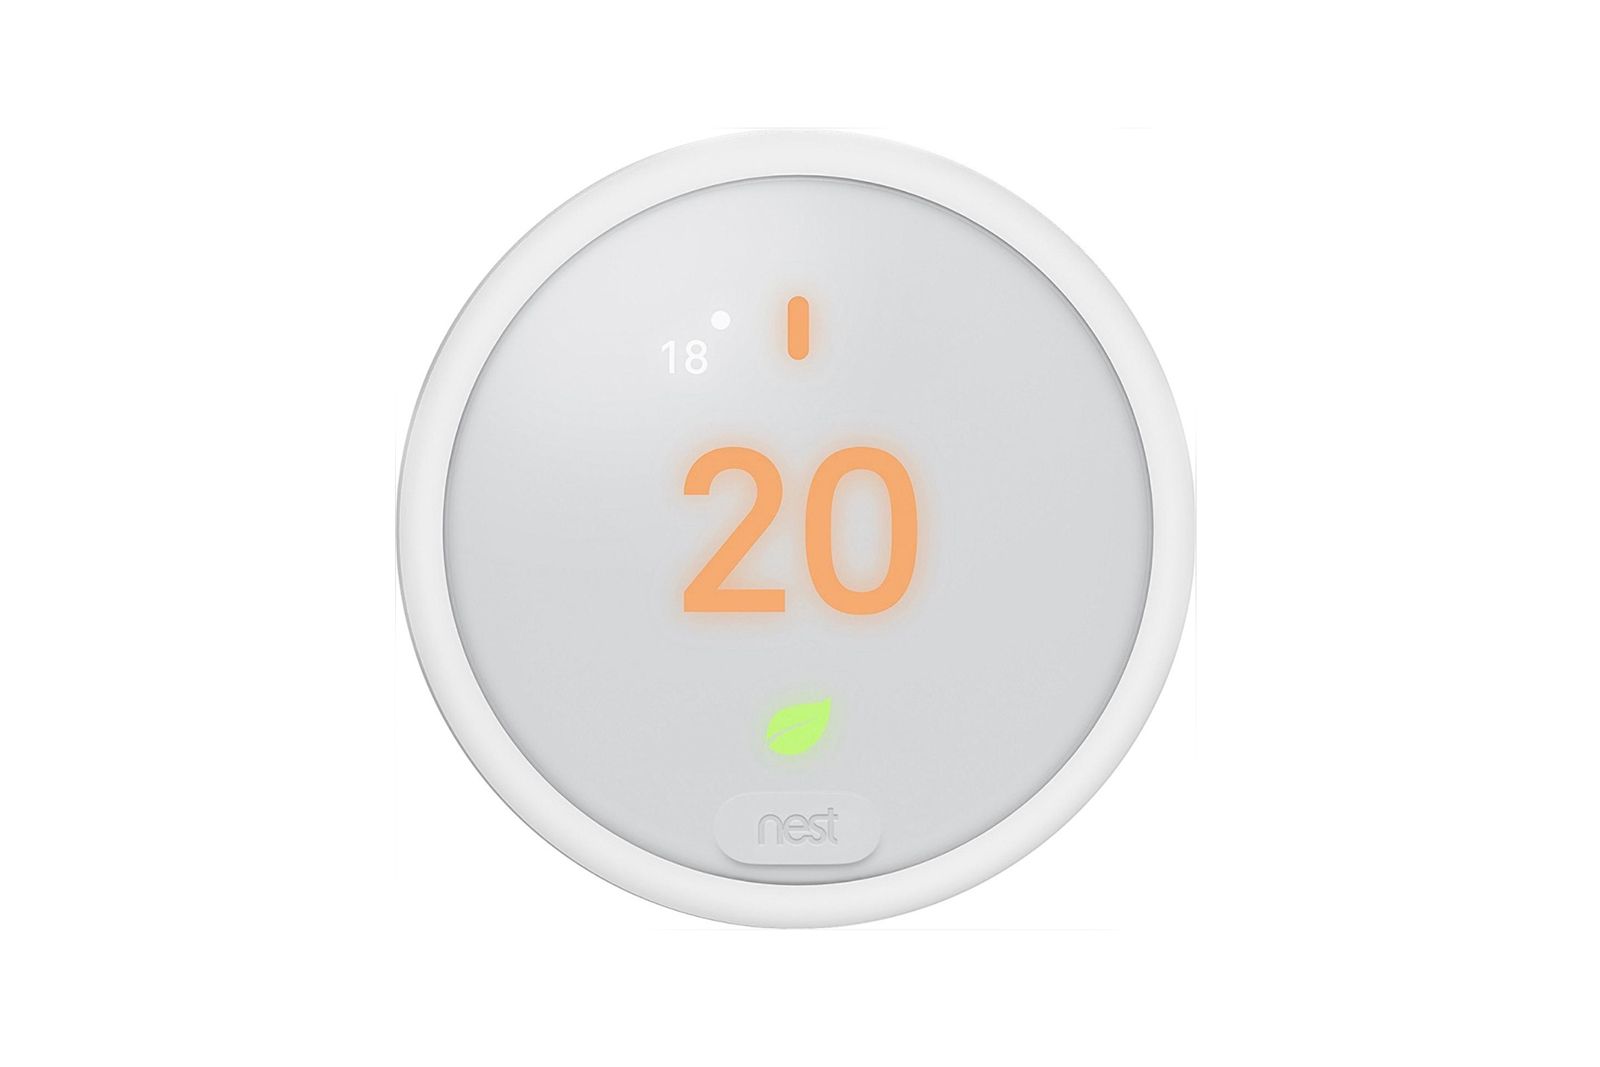 New Nest thermostat with an all-plastic design cheaper price leaks out image 1